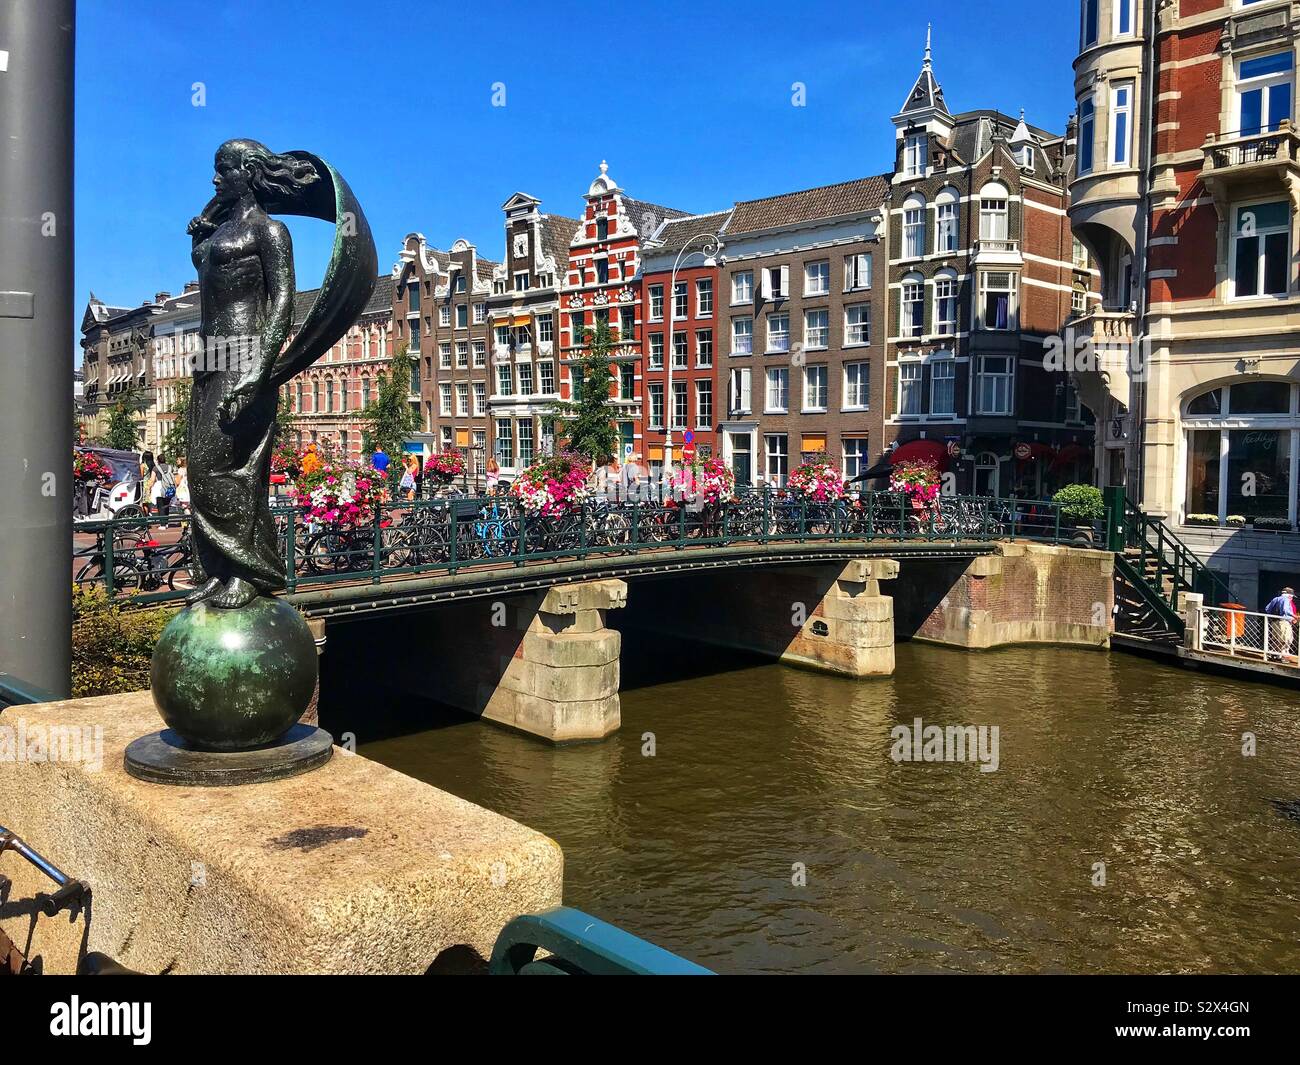 Amsterdam canal and bicycles Stock Photo